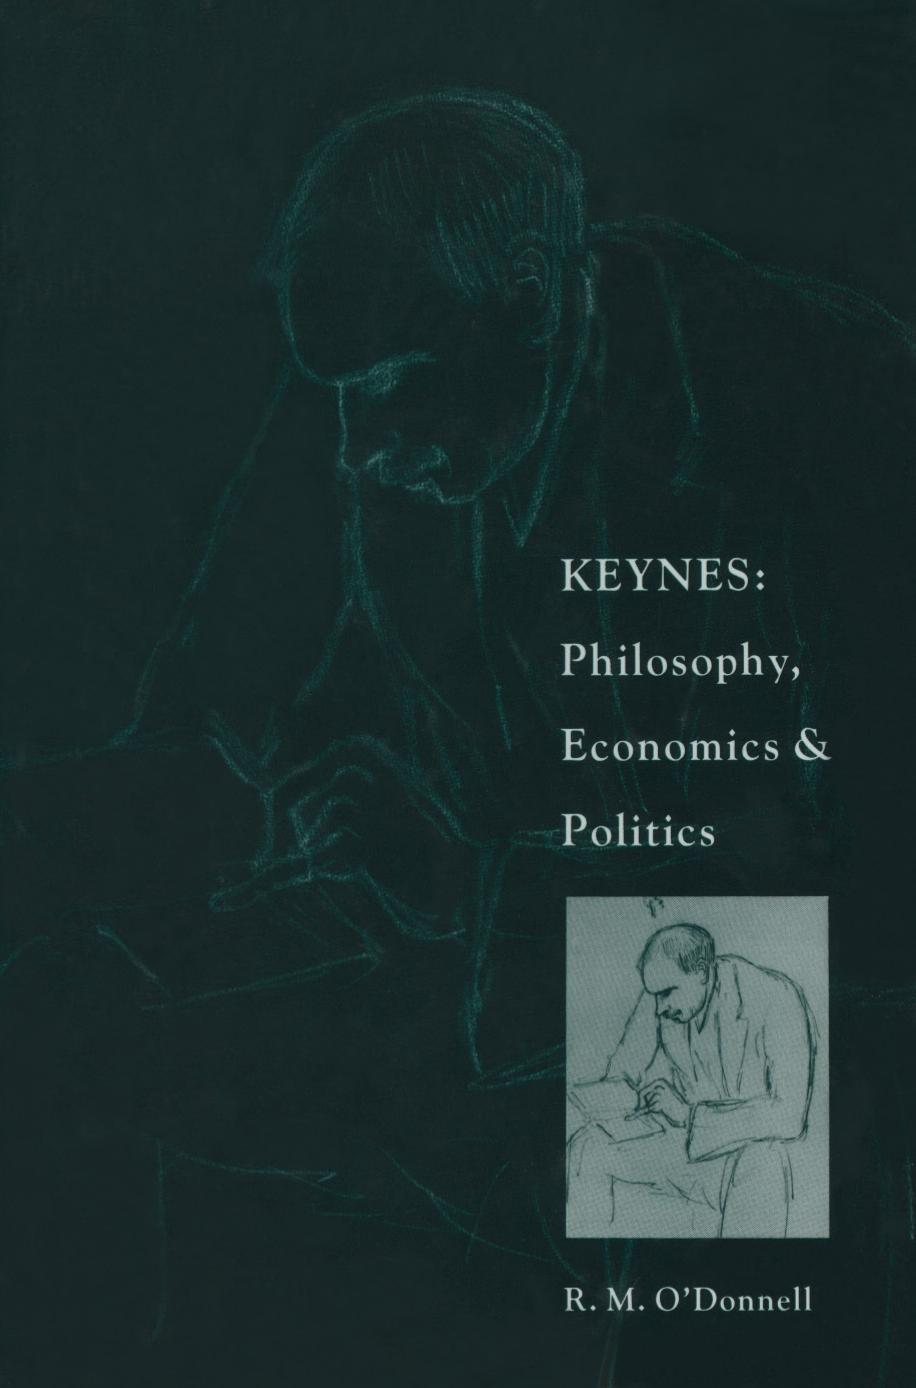 Keynes  Philosophy, Economics and Politics  The Philosophical Foundations of Keynes’s Thought and their Influence 1989